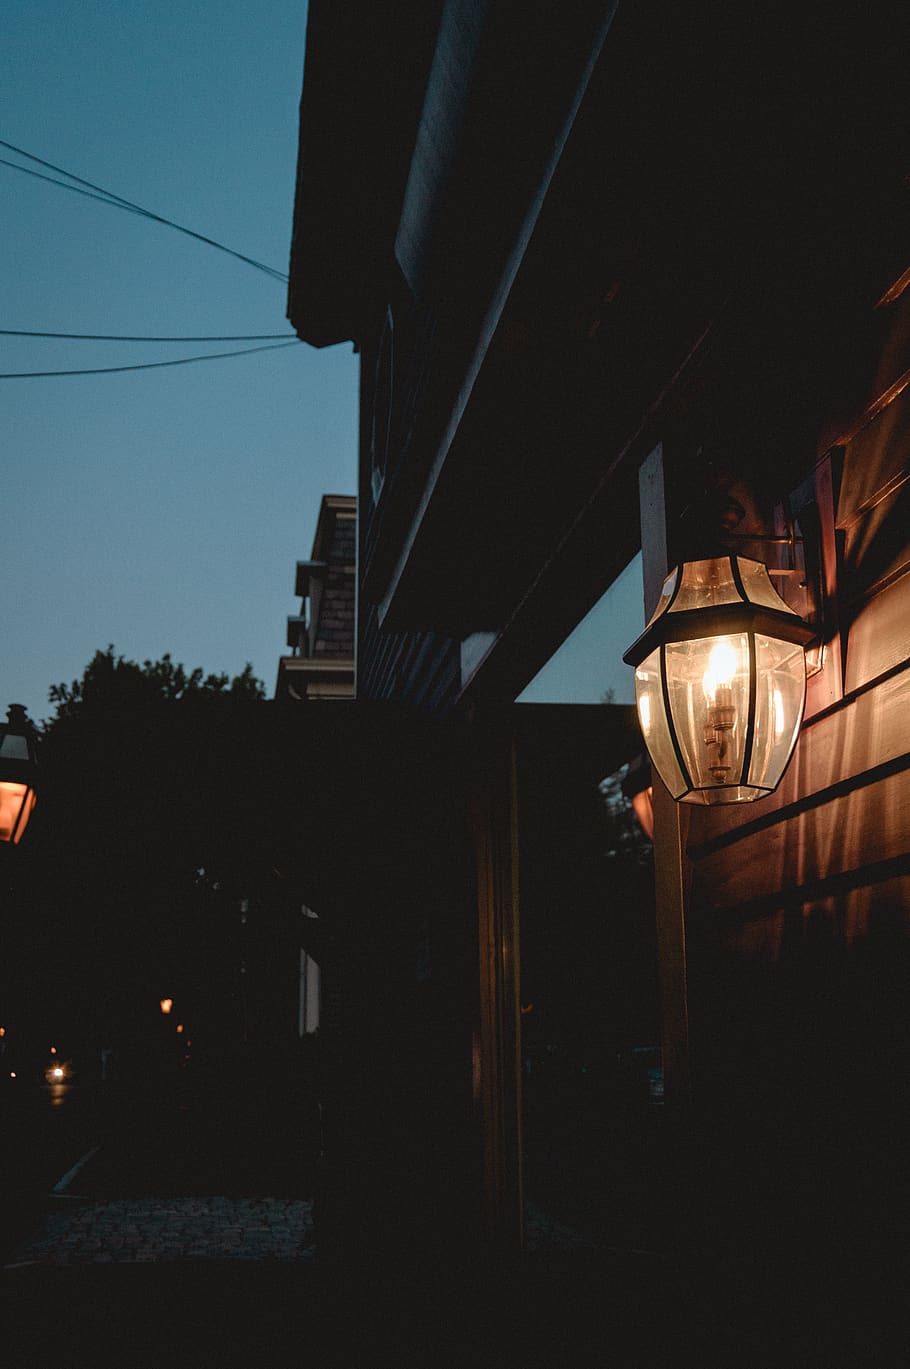 500 Low Light Pictures HD  Download Free Images on Unsplash